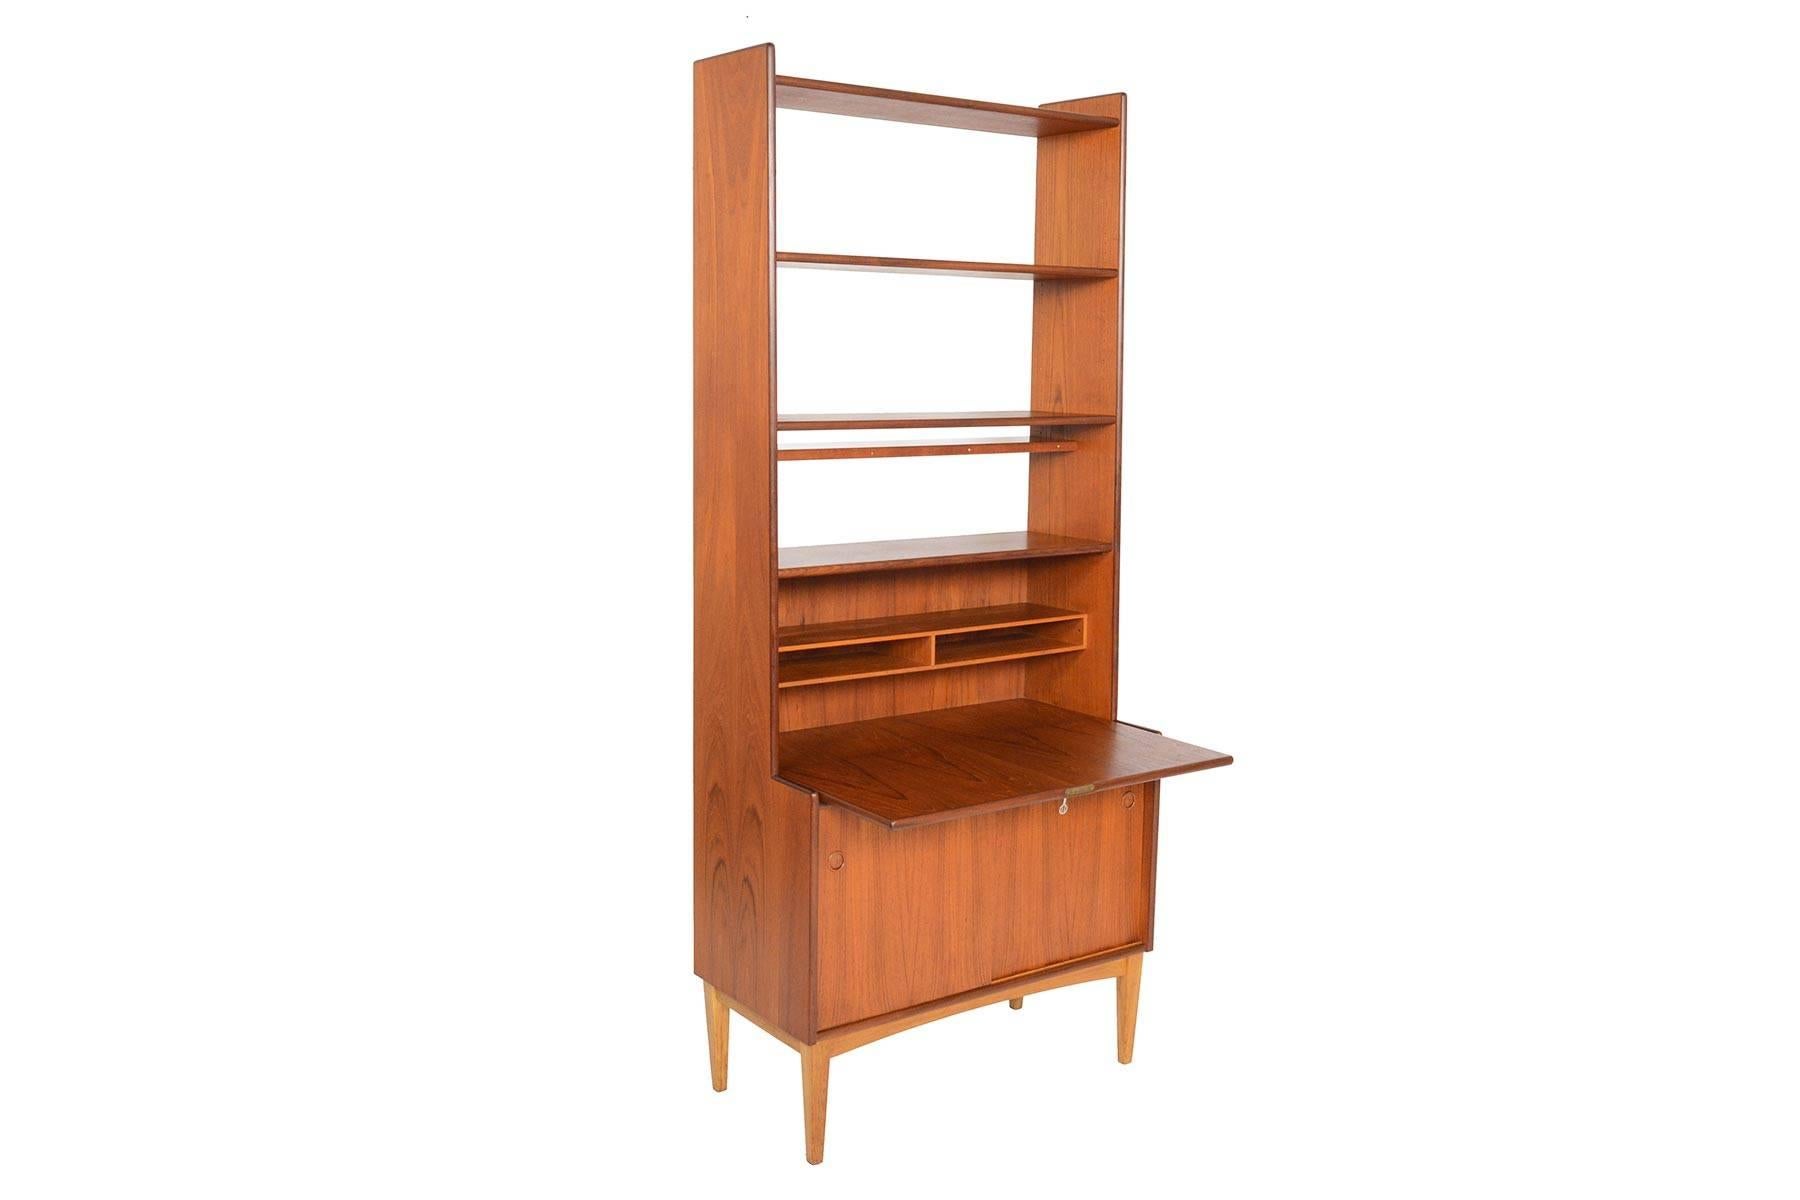 This Swedish modern secretary bookcase by Bräntorps is a versatile storage piece and perfect for any modern home. Bookcase top features three fixed shelves and rests atop of a drop- down case with divided storage. When the case is dropped, a desk is